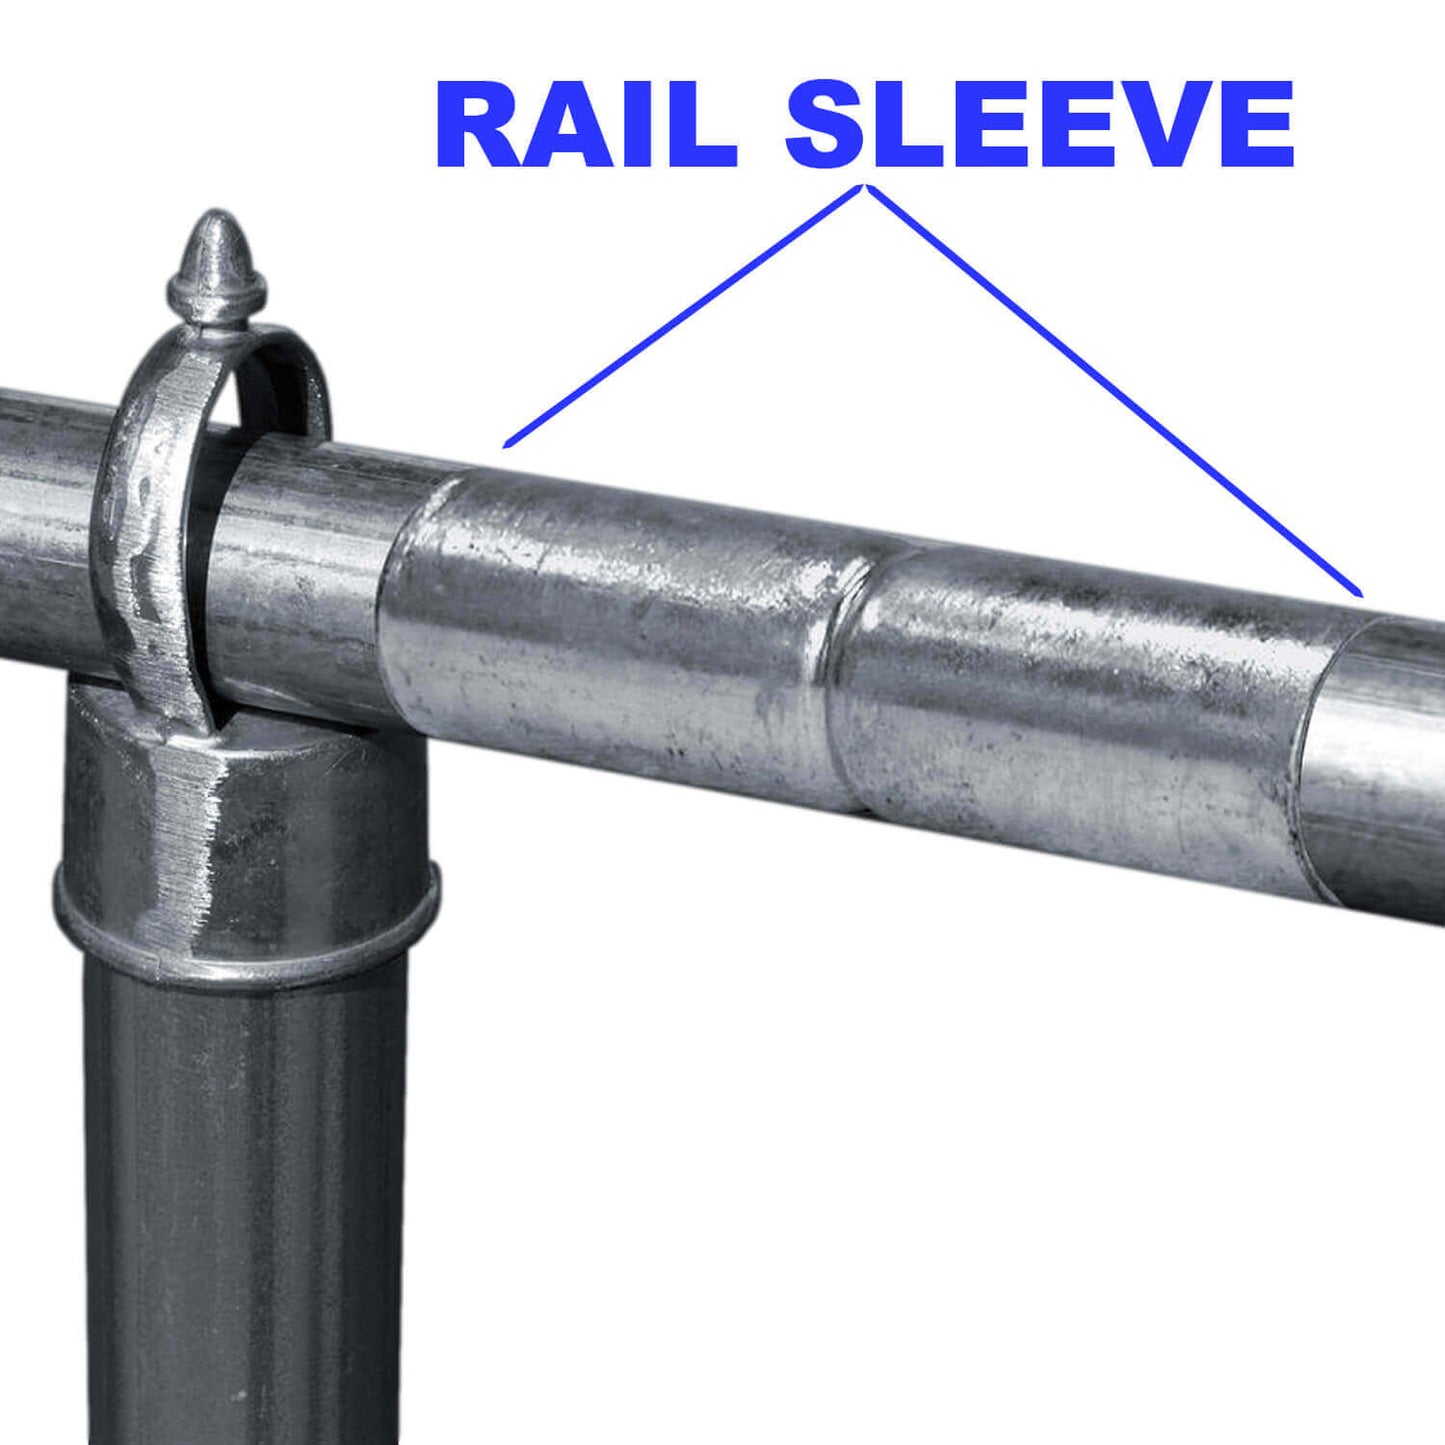 Top Rail Sleeve fits Over top rail to join together another top rail of equal diameter. Top Rail Sleeves can also be called a chain link fence Top Rail Connector or Top Rail Adapter